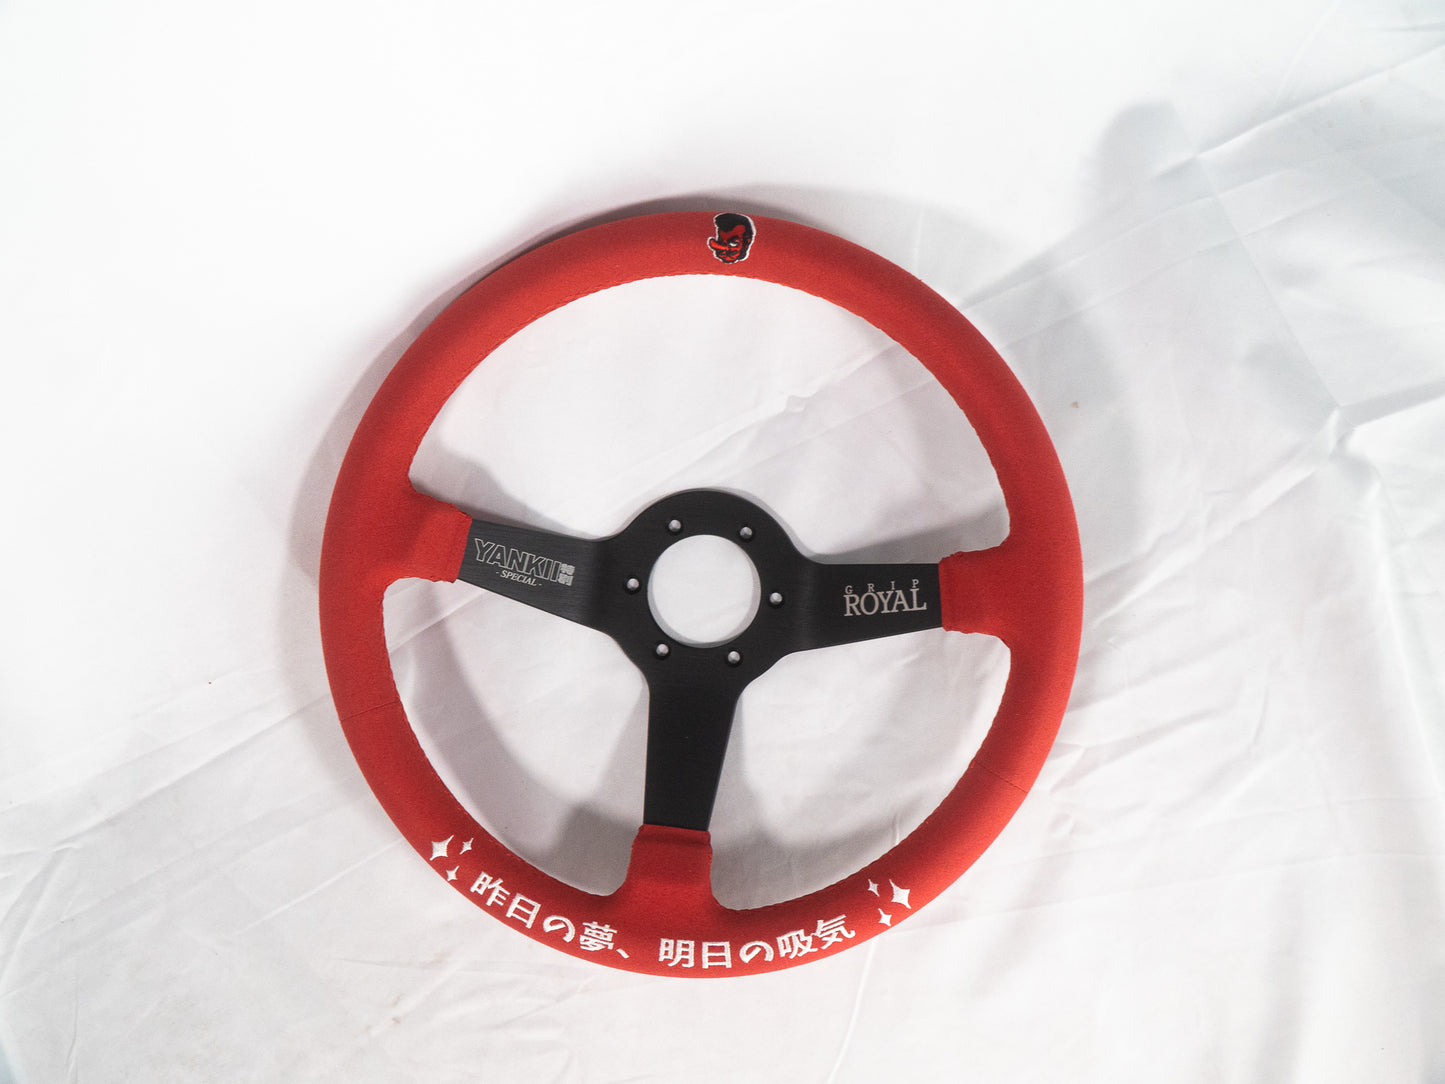 Yankii special x Grip Royal Red suede wheel